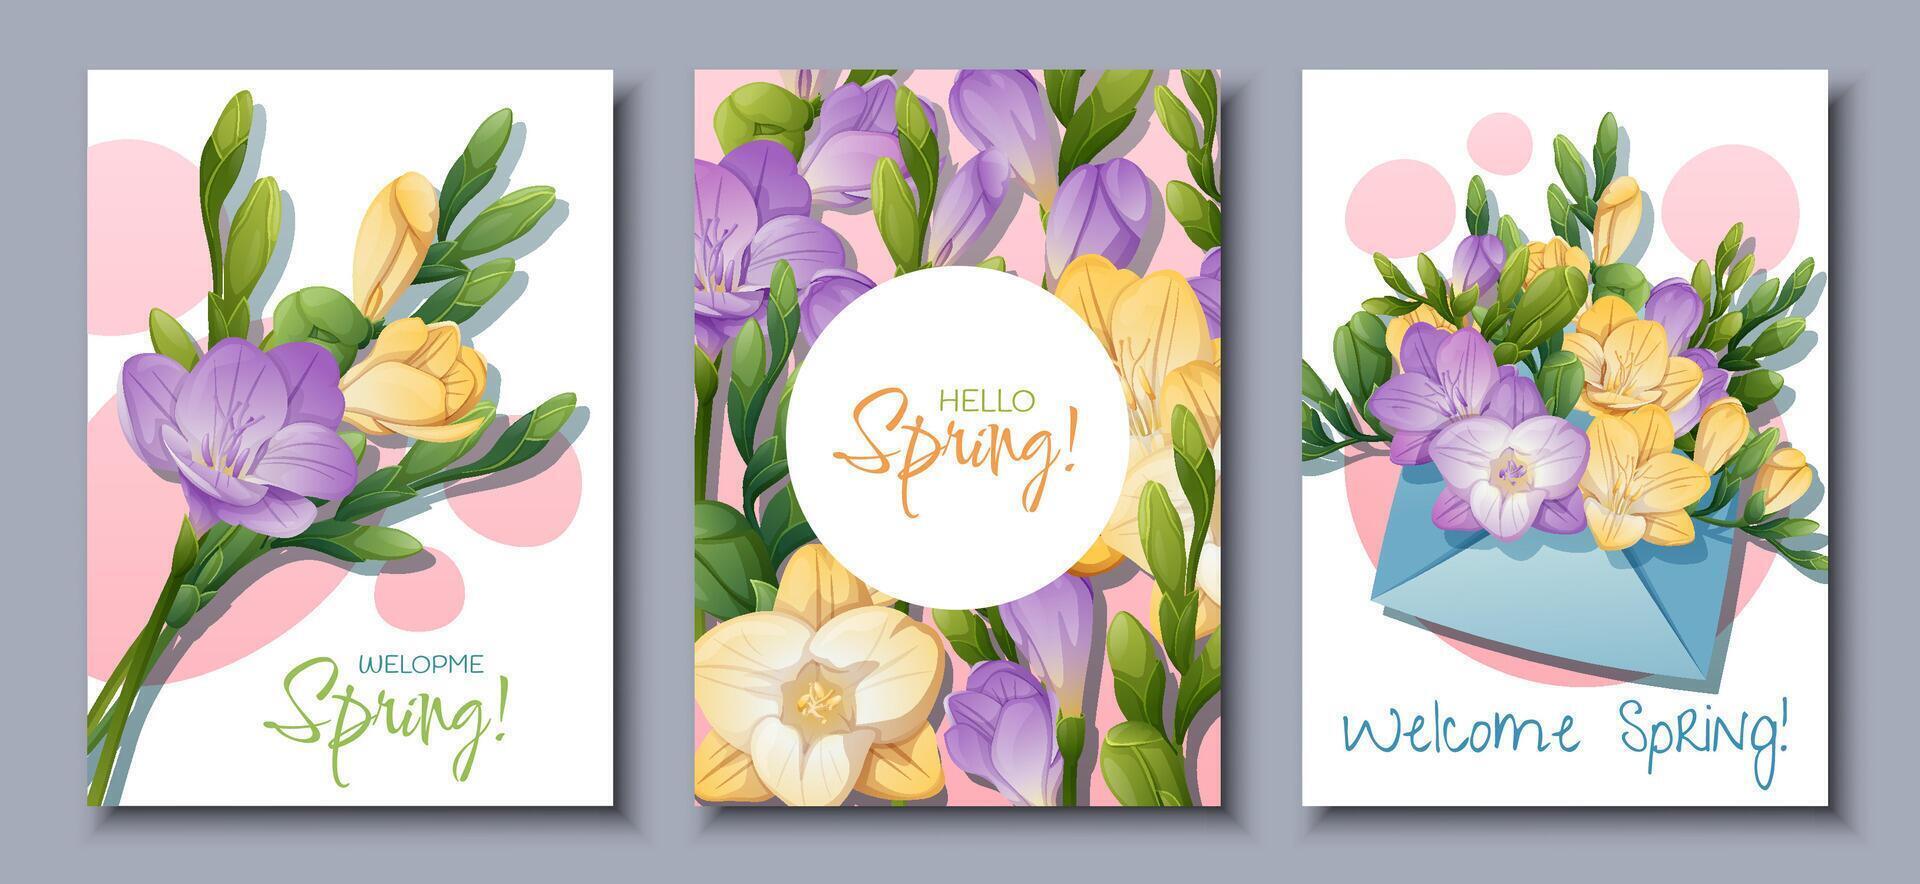 Set of greeting card templates with spring flowers. Poster, banner with freesia in an envelope, bouquet. Hello spring. illustration of delicate flowers in cartoon style for card, invitation vector